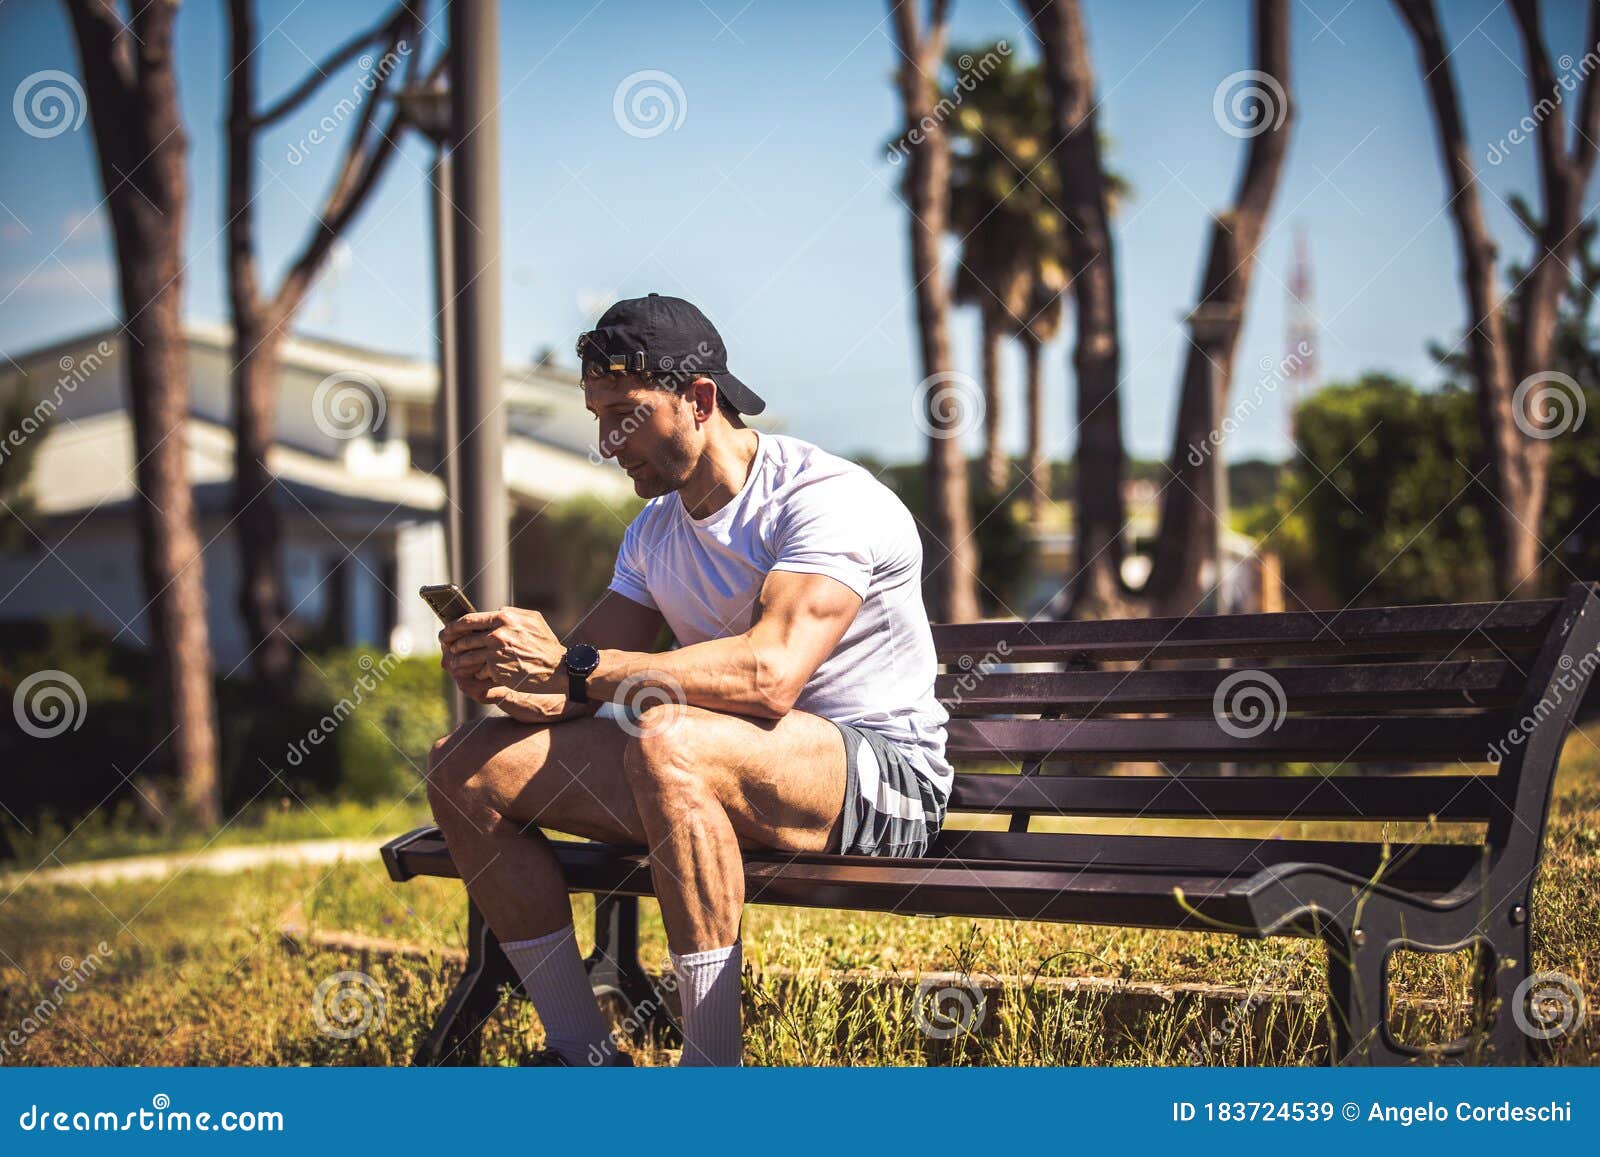 sporty man personal trainer sitting looking at his phone on a bench in an outdoor park. muscle body and well defined. sporty